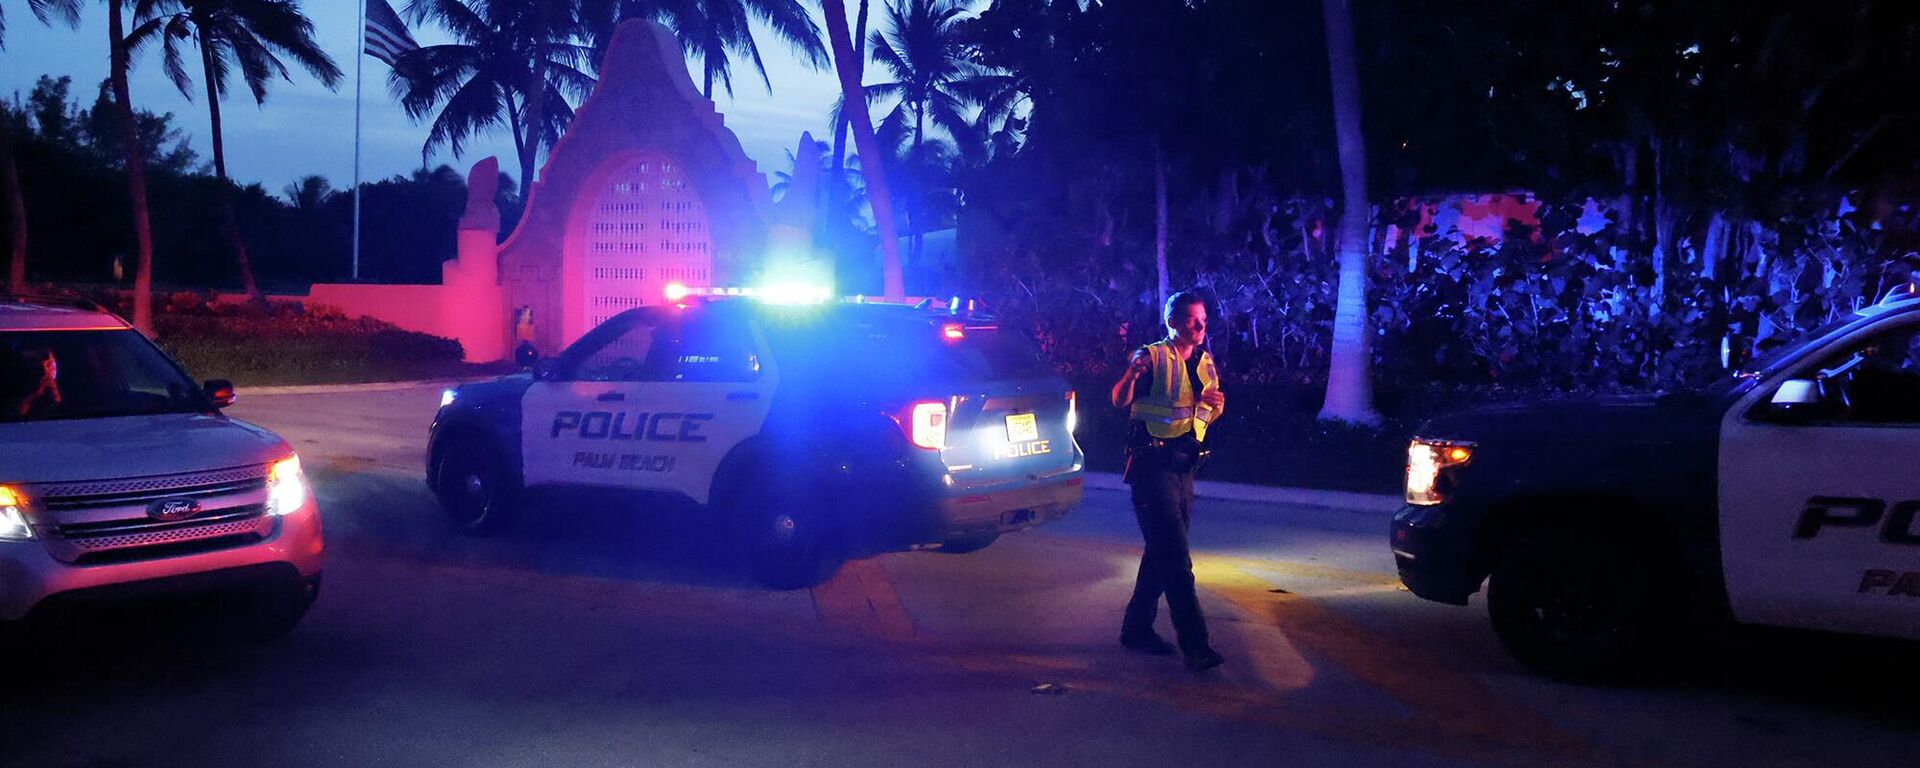 Police direct traffic outside an entrance to former President Donald Trump's Mar-a-Lago estate, Monday, Aug. 8, 2022, in Palm Beach, Fla. Trump said in a lengthy statement that the FBI was conducting a search of his Mar-a-Lago estate and asserted that agents had broken open a safe. (AP Photo/Terry Renna) - Sputnik International, 1920, 11.06.2023